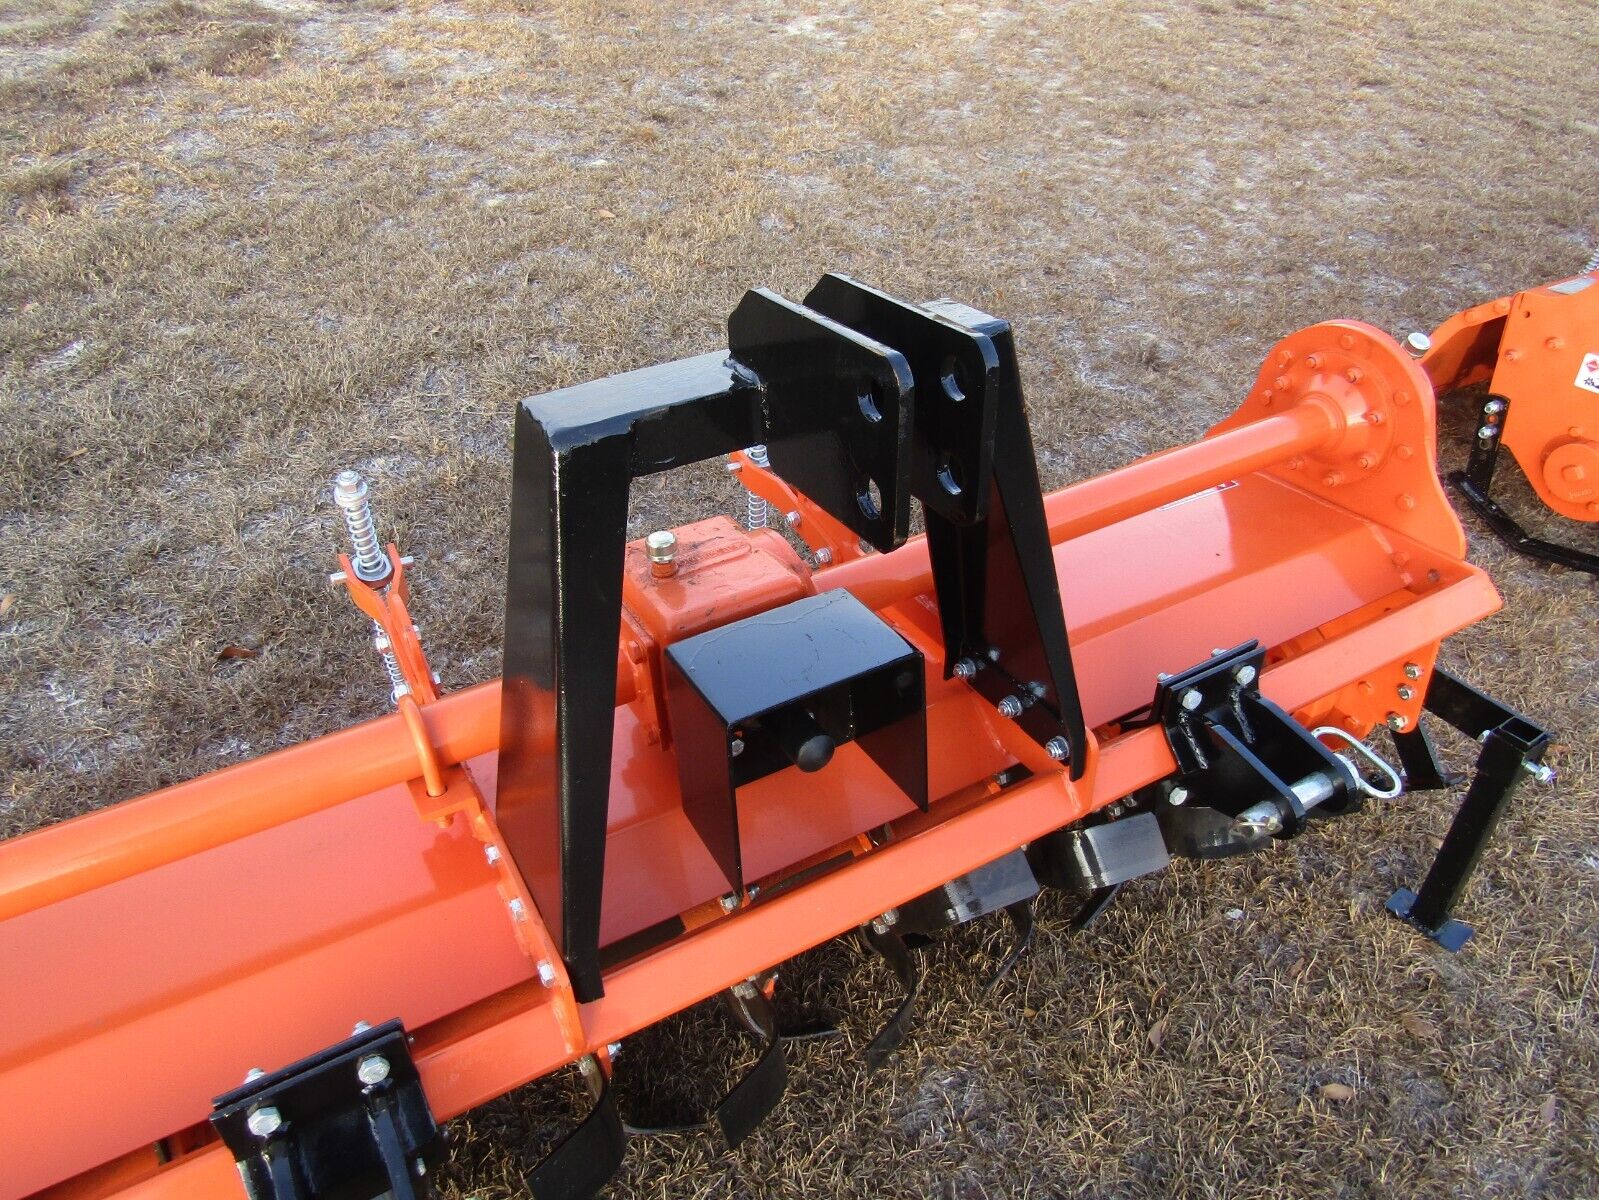 65" Rotary Tiller, HD Gear drive (no chain), slip clutch pto, all welded A-Frame